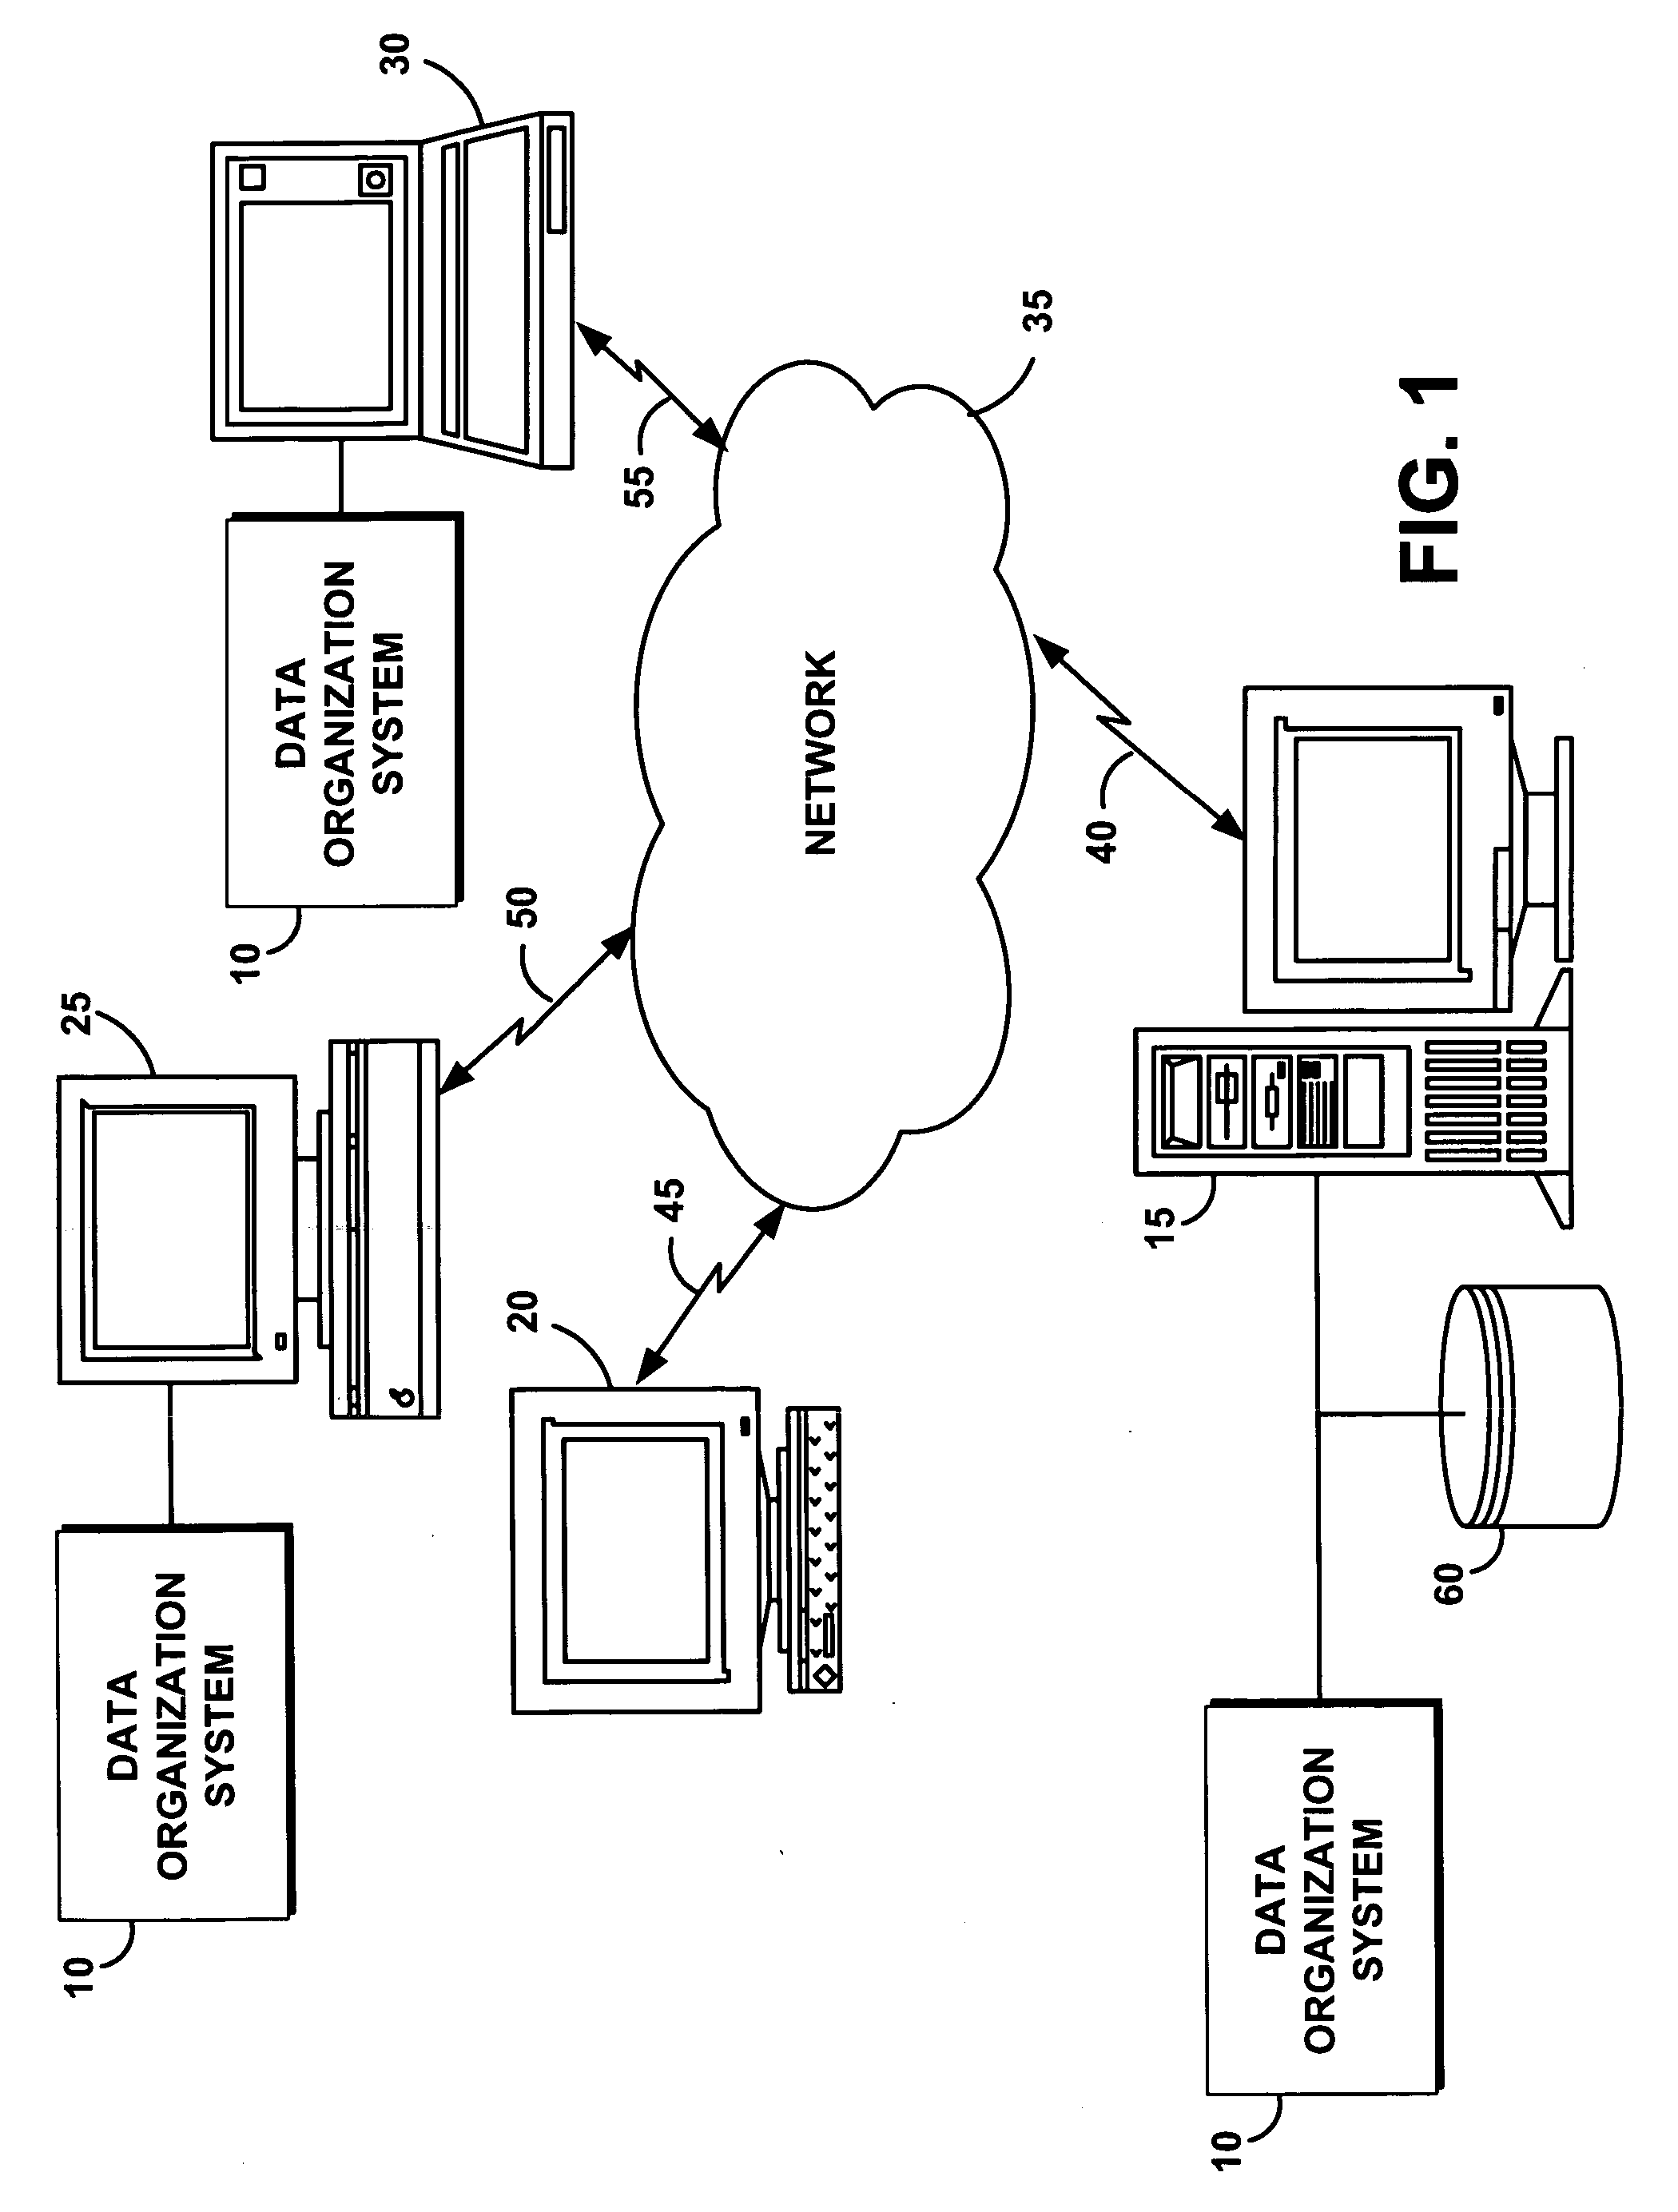 System, method, and service for organizing data for fast retrieval